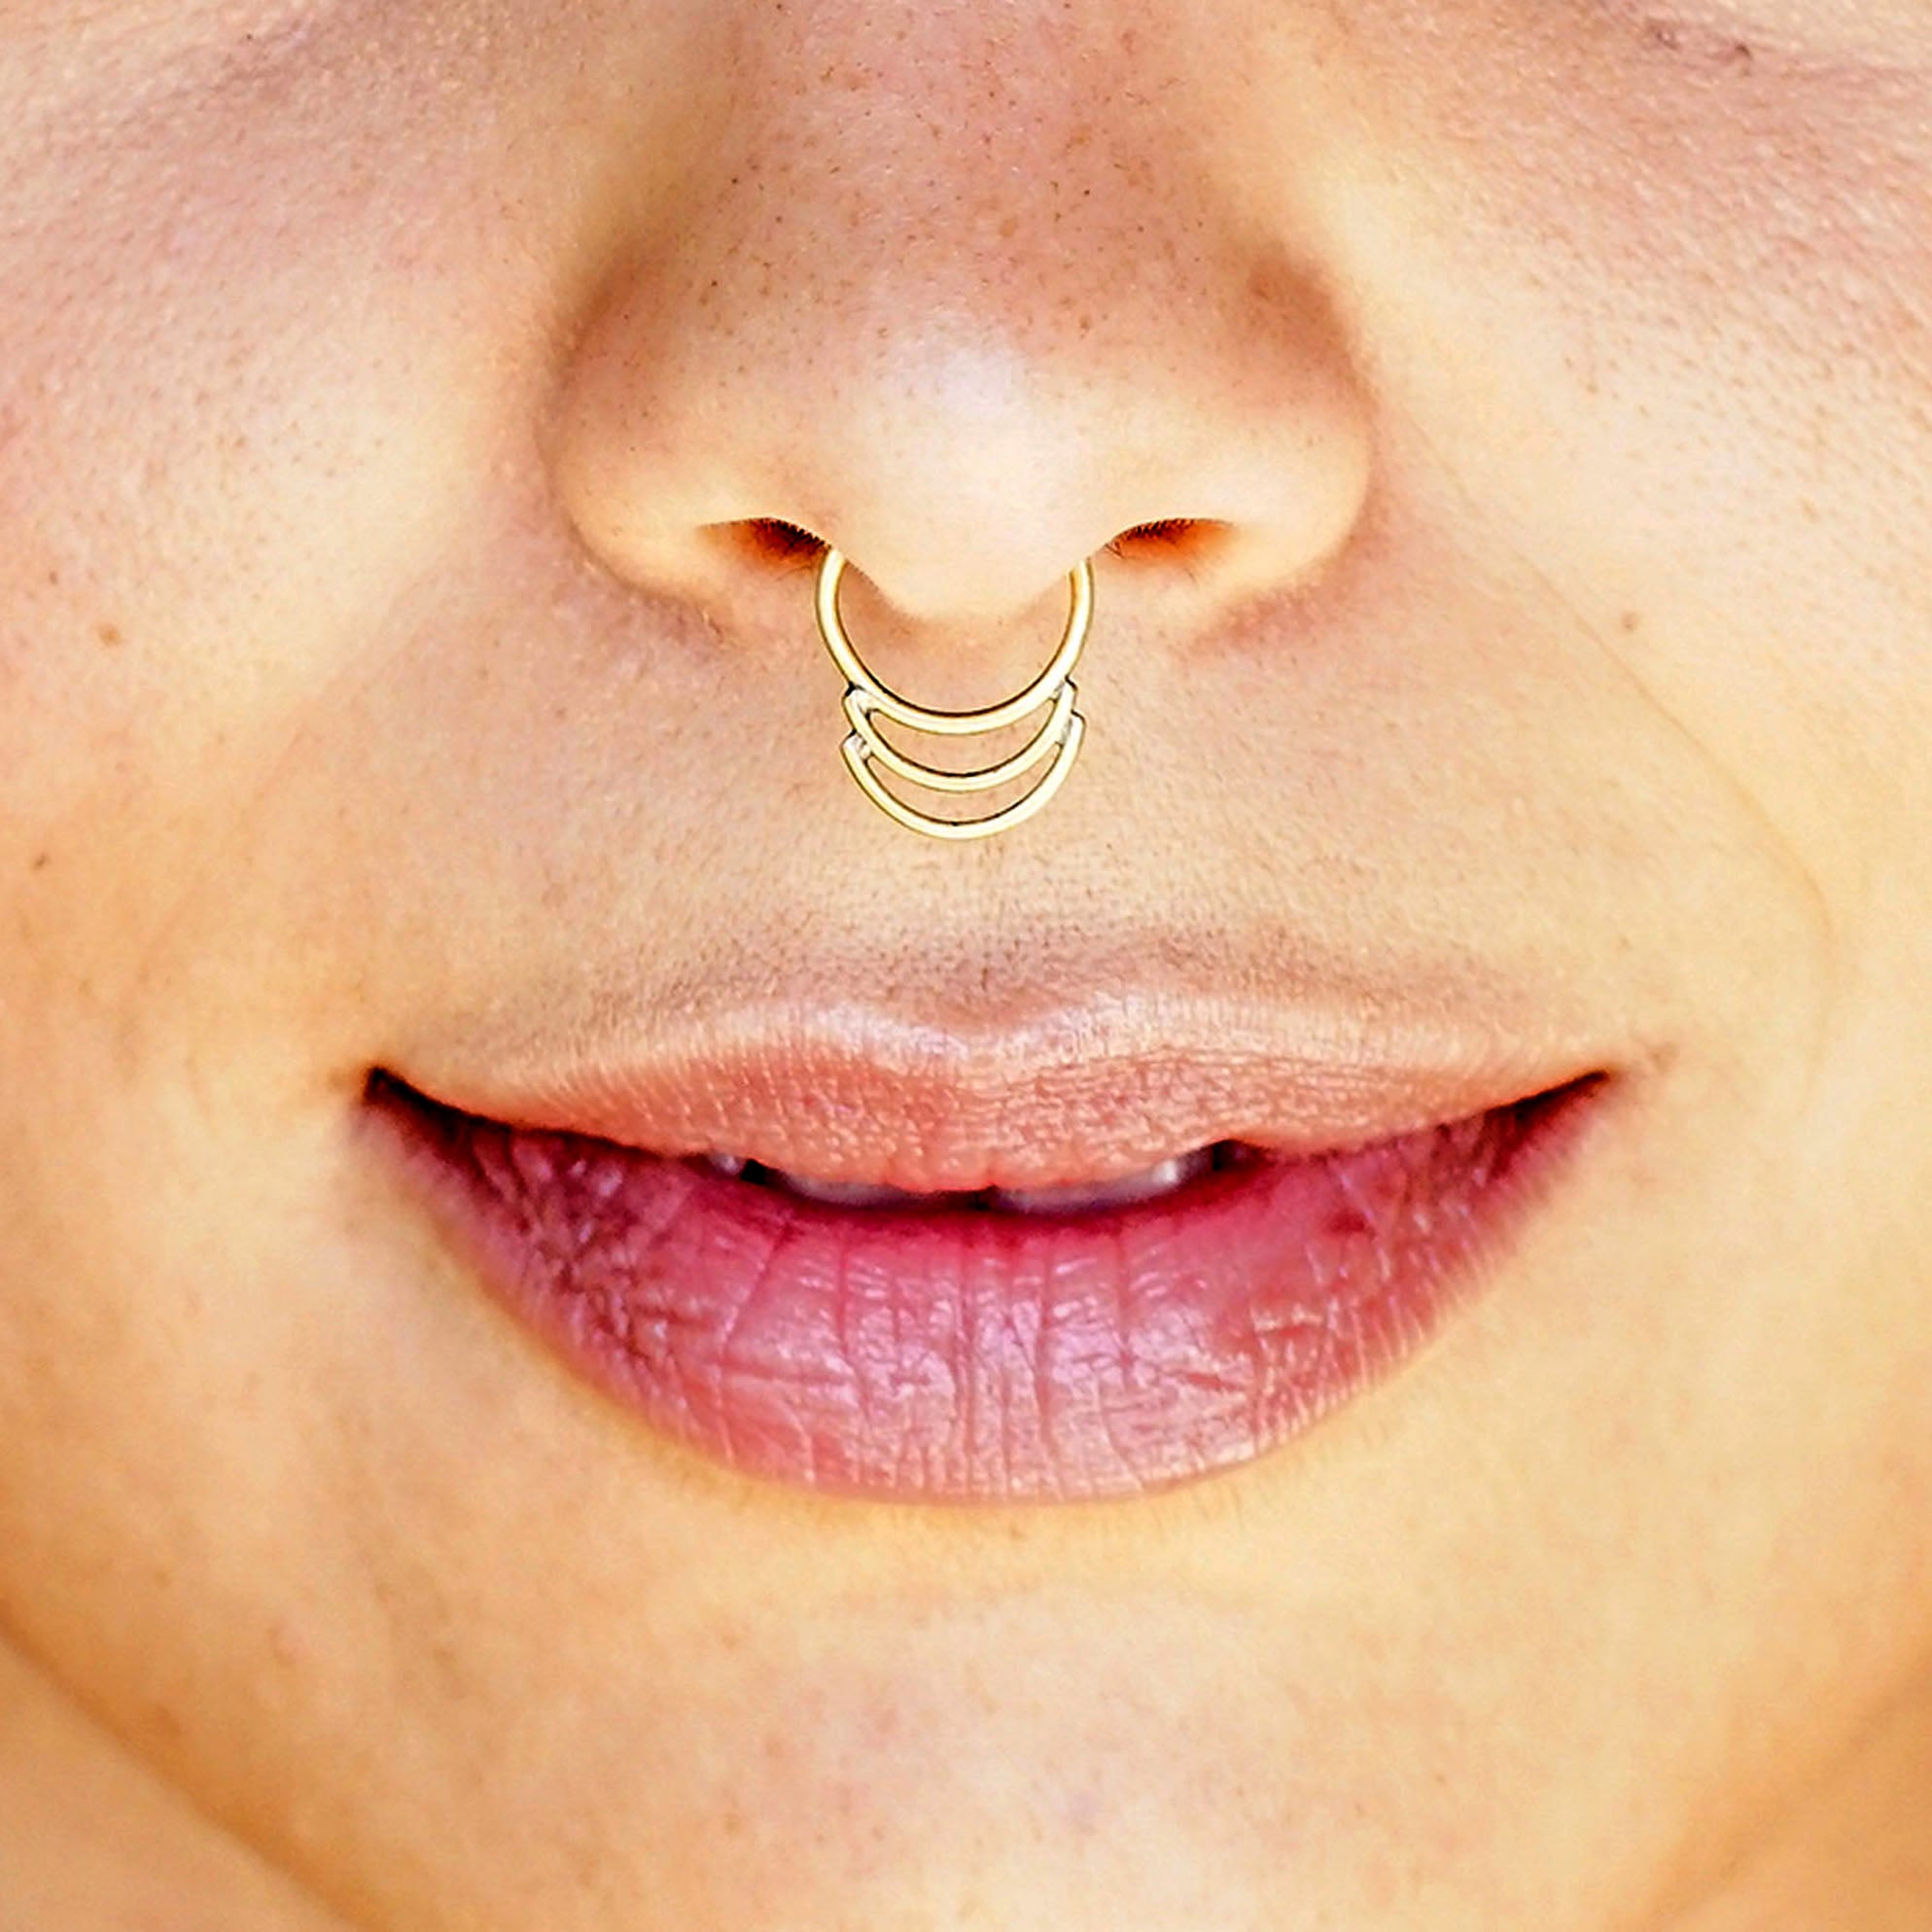 & Studs Body Drop Delivery 2021 Stainless Steel Moon Ring Indian Septum  Rings Jewelry Piercing Small Nose Hoop Piercings For Woman Man X6Ndl From  Sexyhanz, $26.5 | DHgate.Com